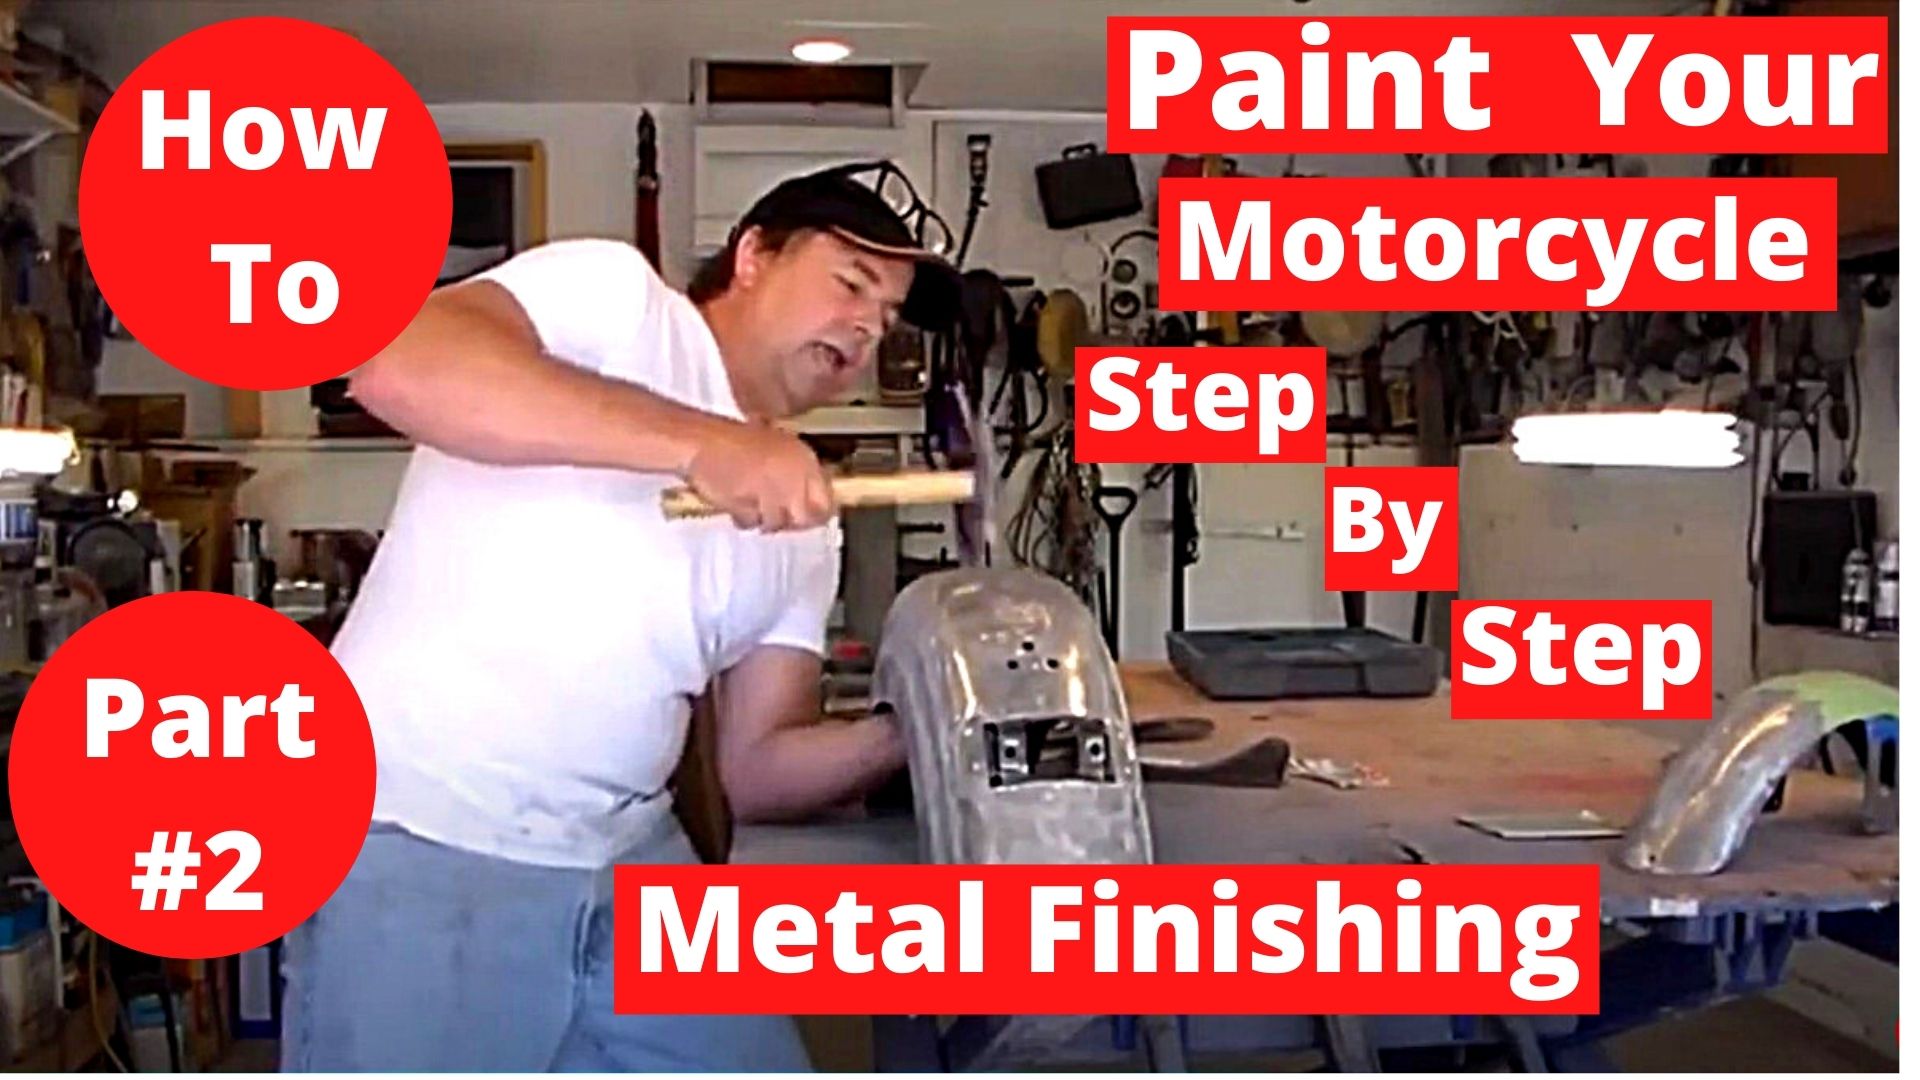 How To Paint Your Motorcycle Step By Step Part #2 Metal Finishing